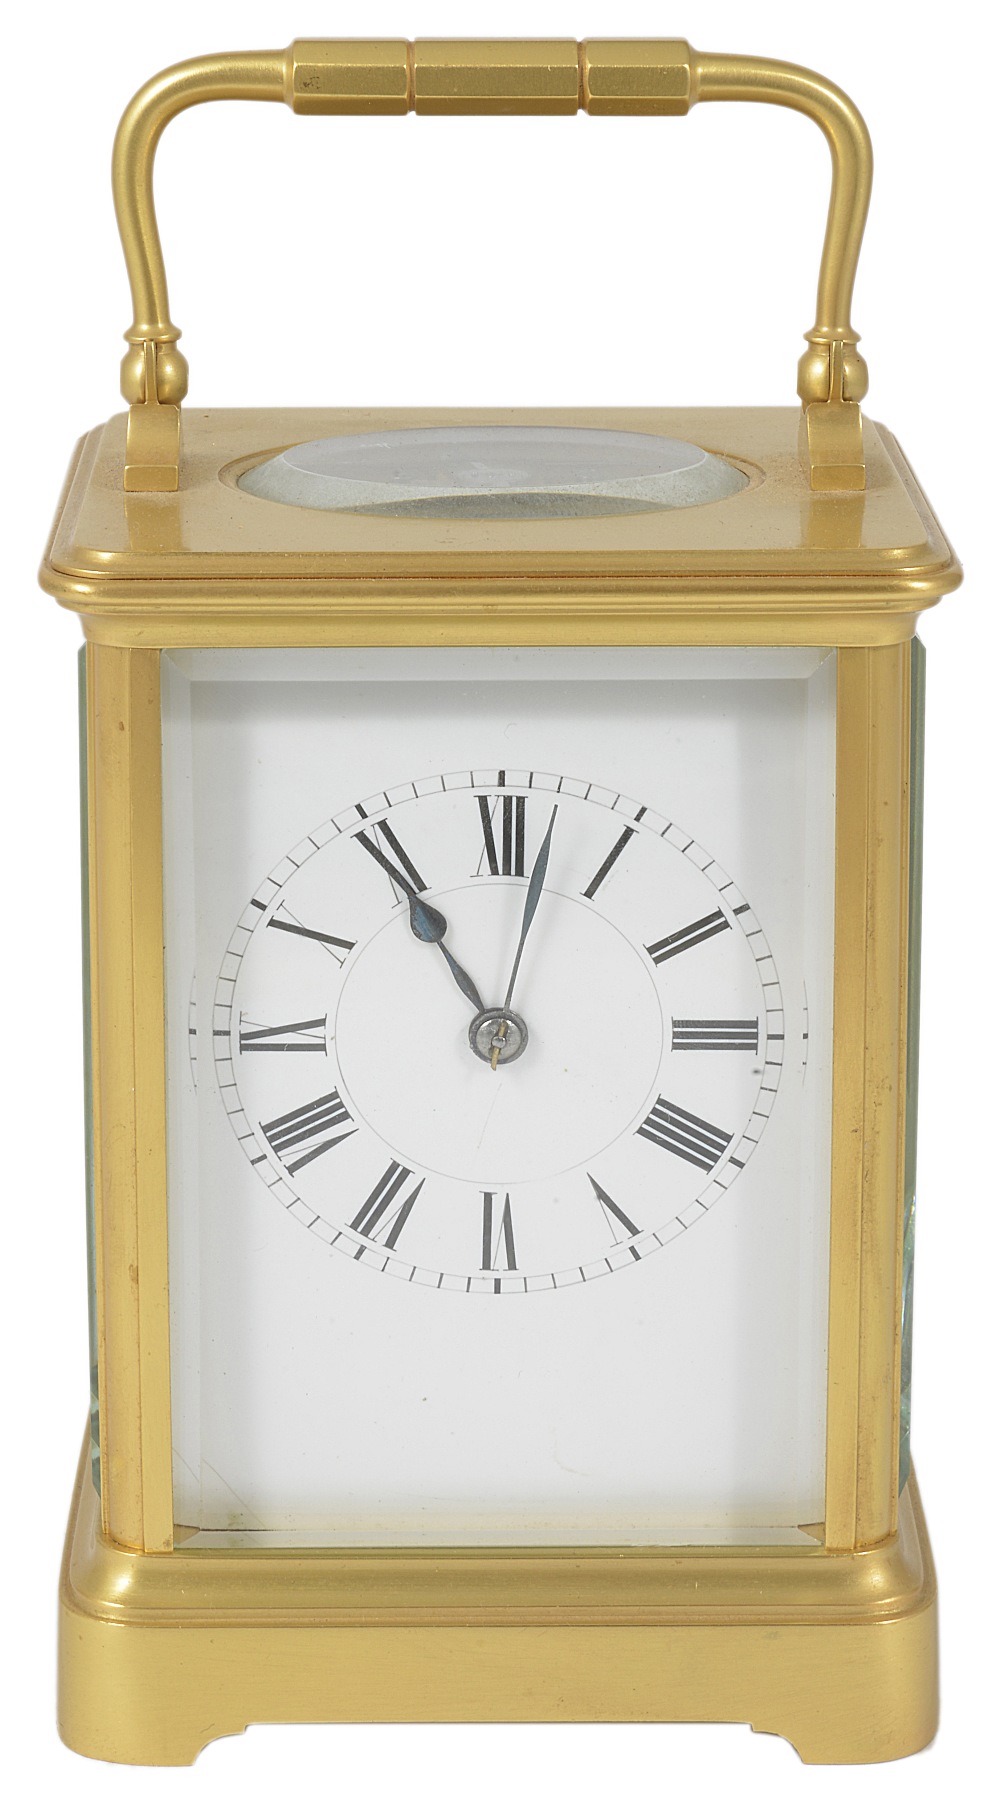 A FRENCH CARRIAGE CLOCK, HENRI JACOT, PARIS, CIRCA 1900 gong striking movement, white dial with